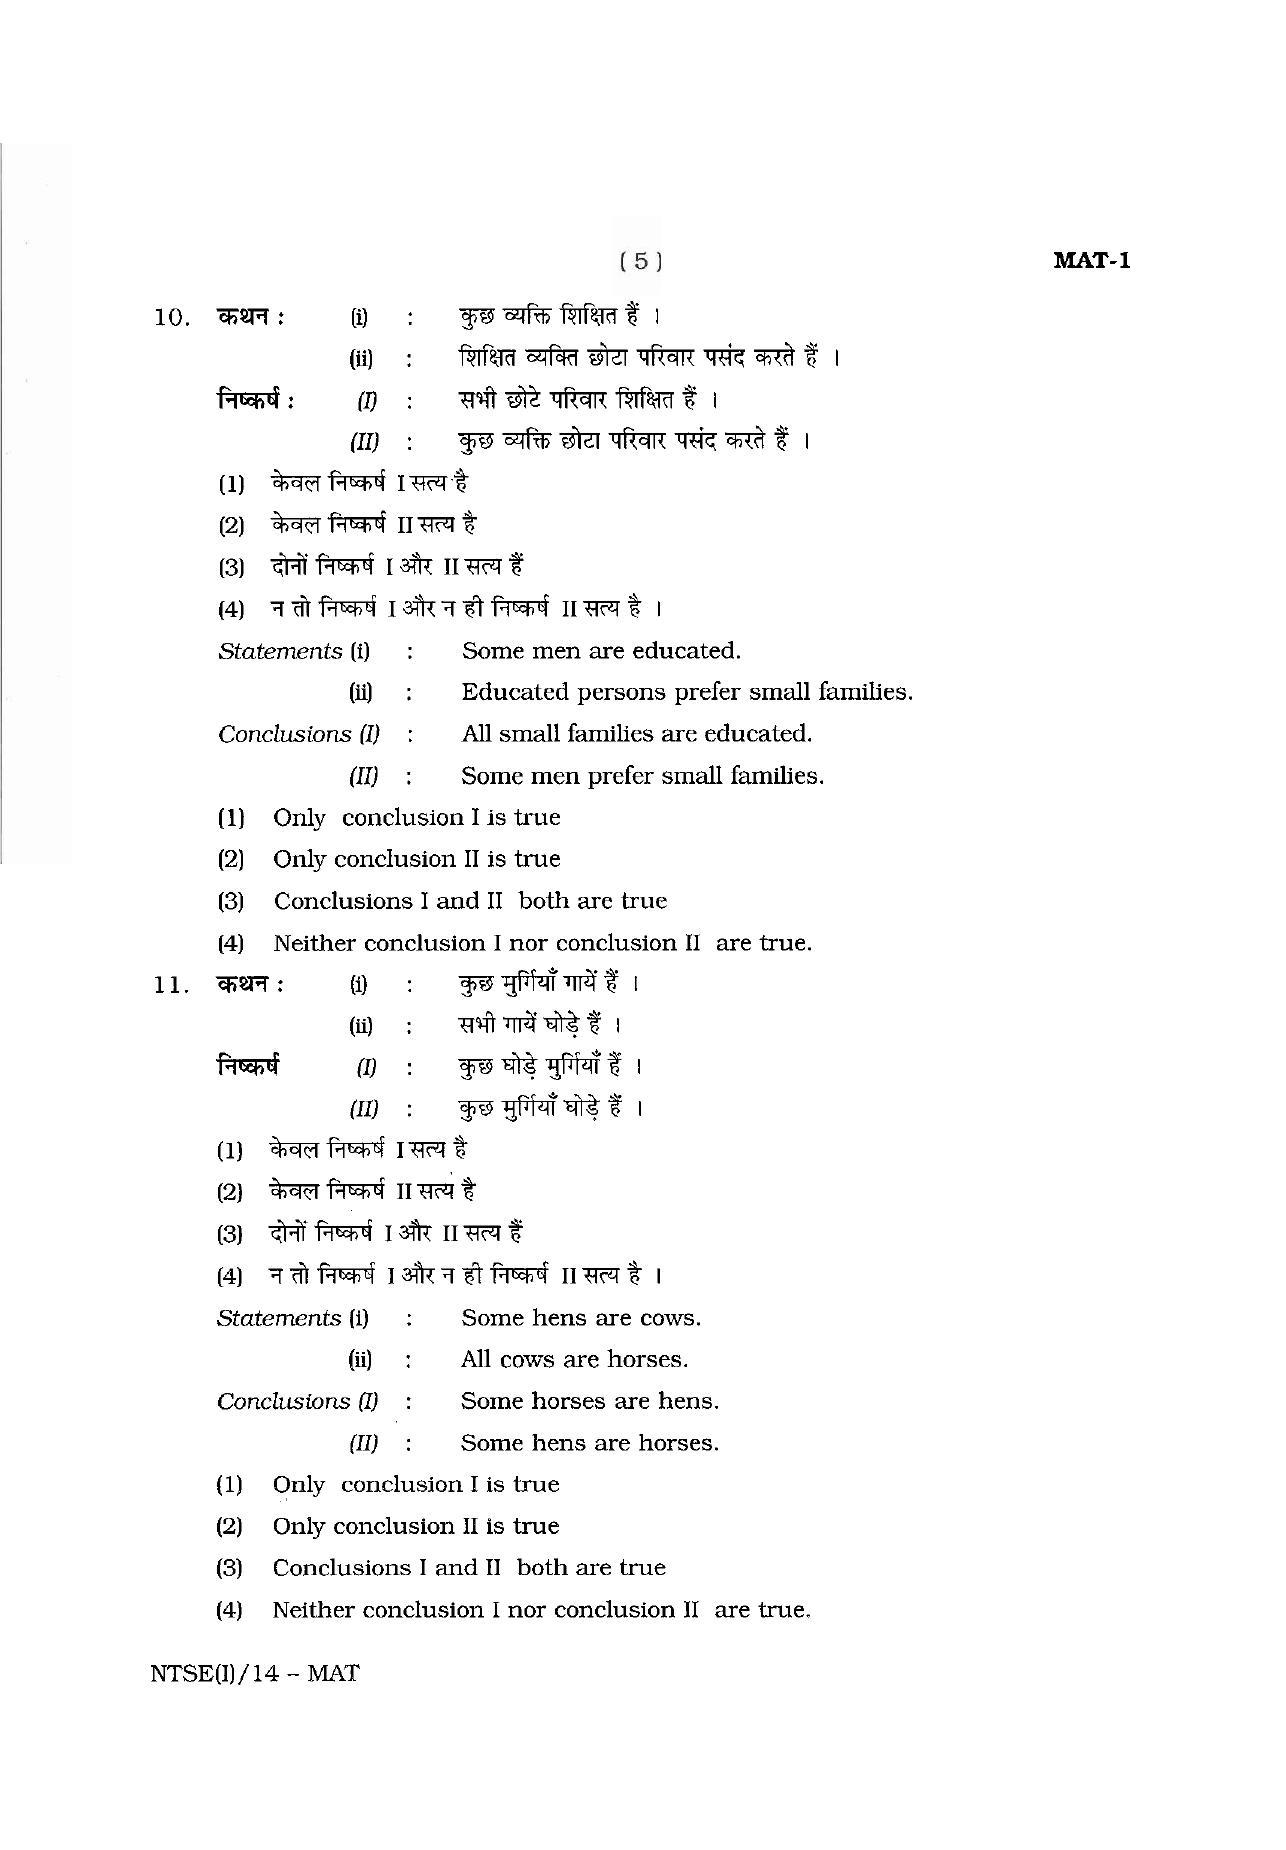 NTSE 2014 (Stage II) MAT Question Paper - Page 5